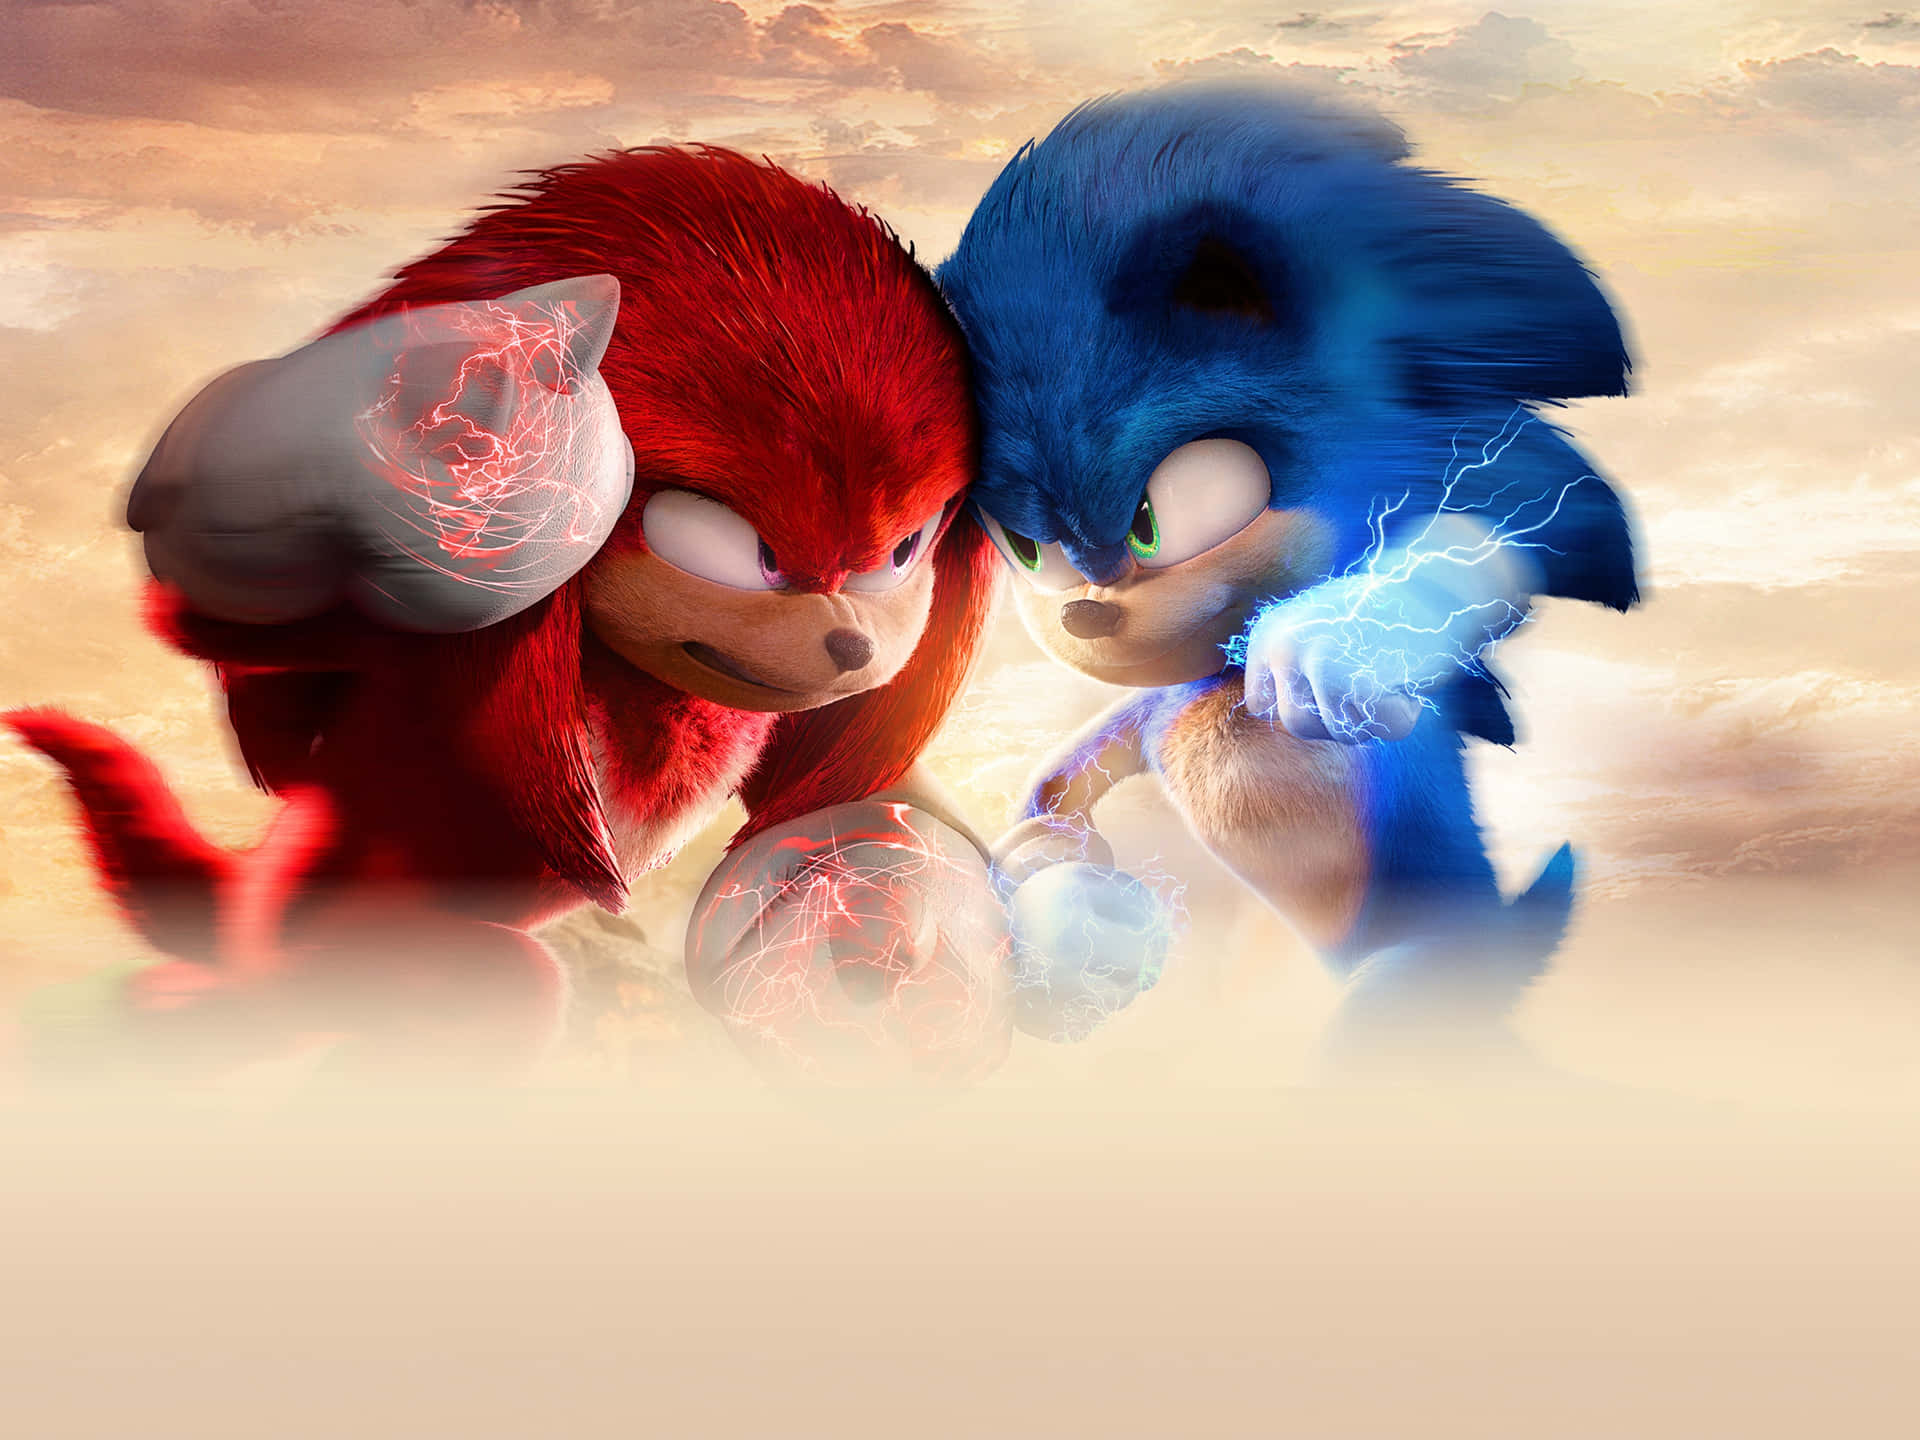 Knuckles The Echidna From The Sonic The Hedgehog Universe Background